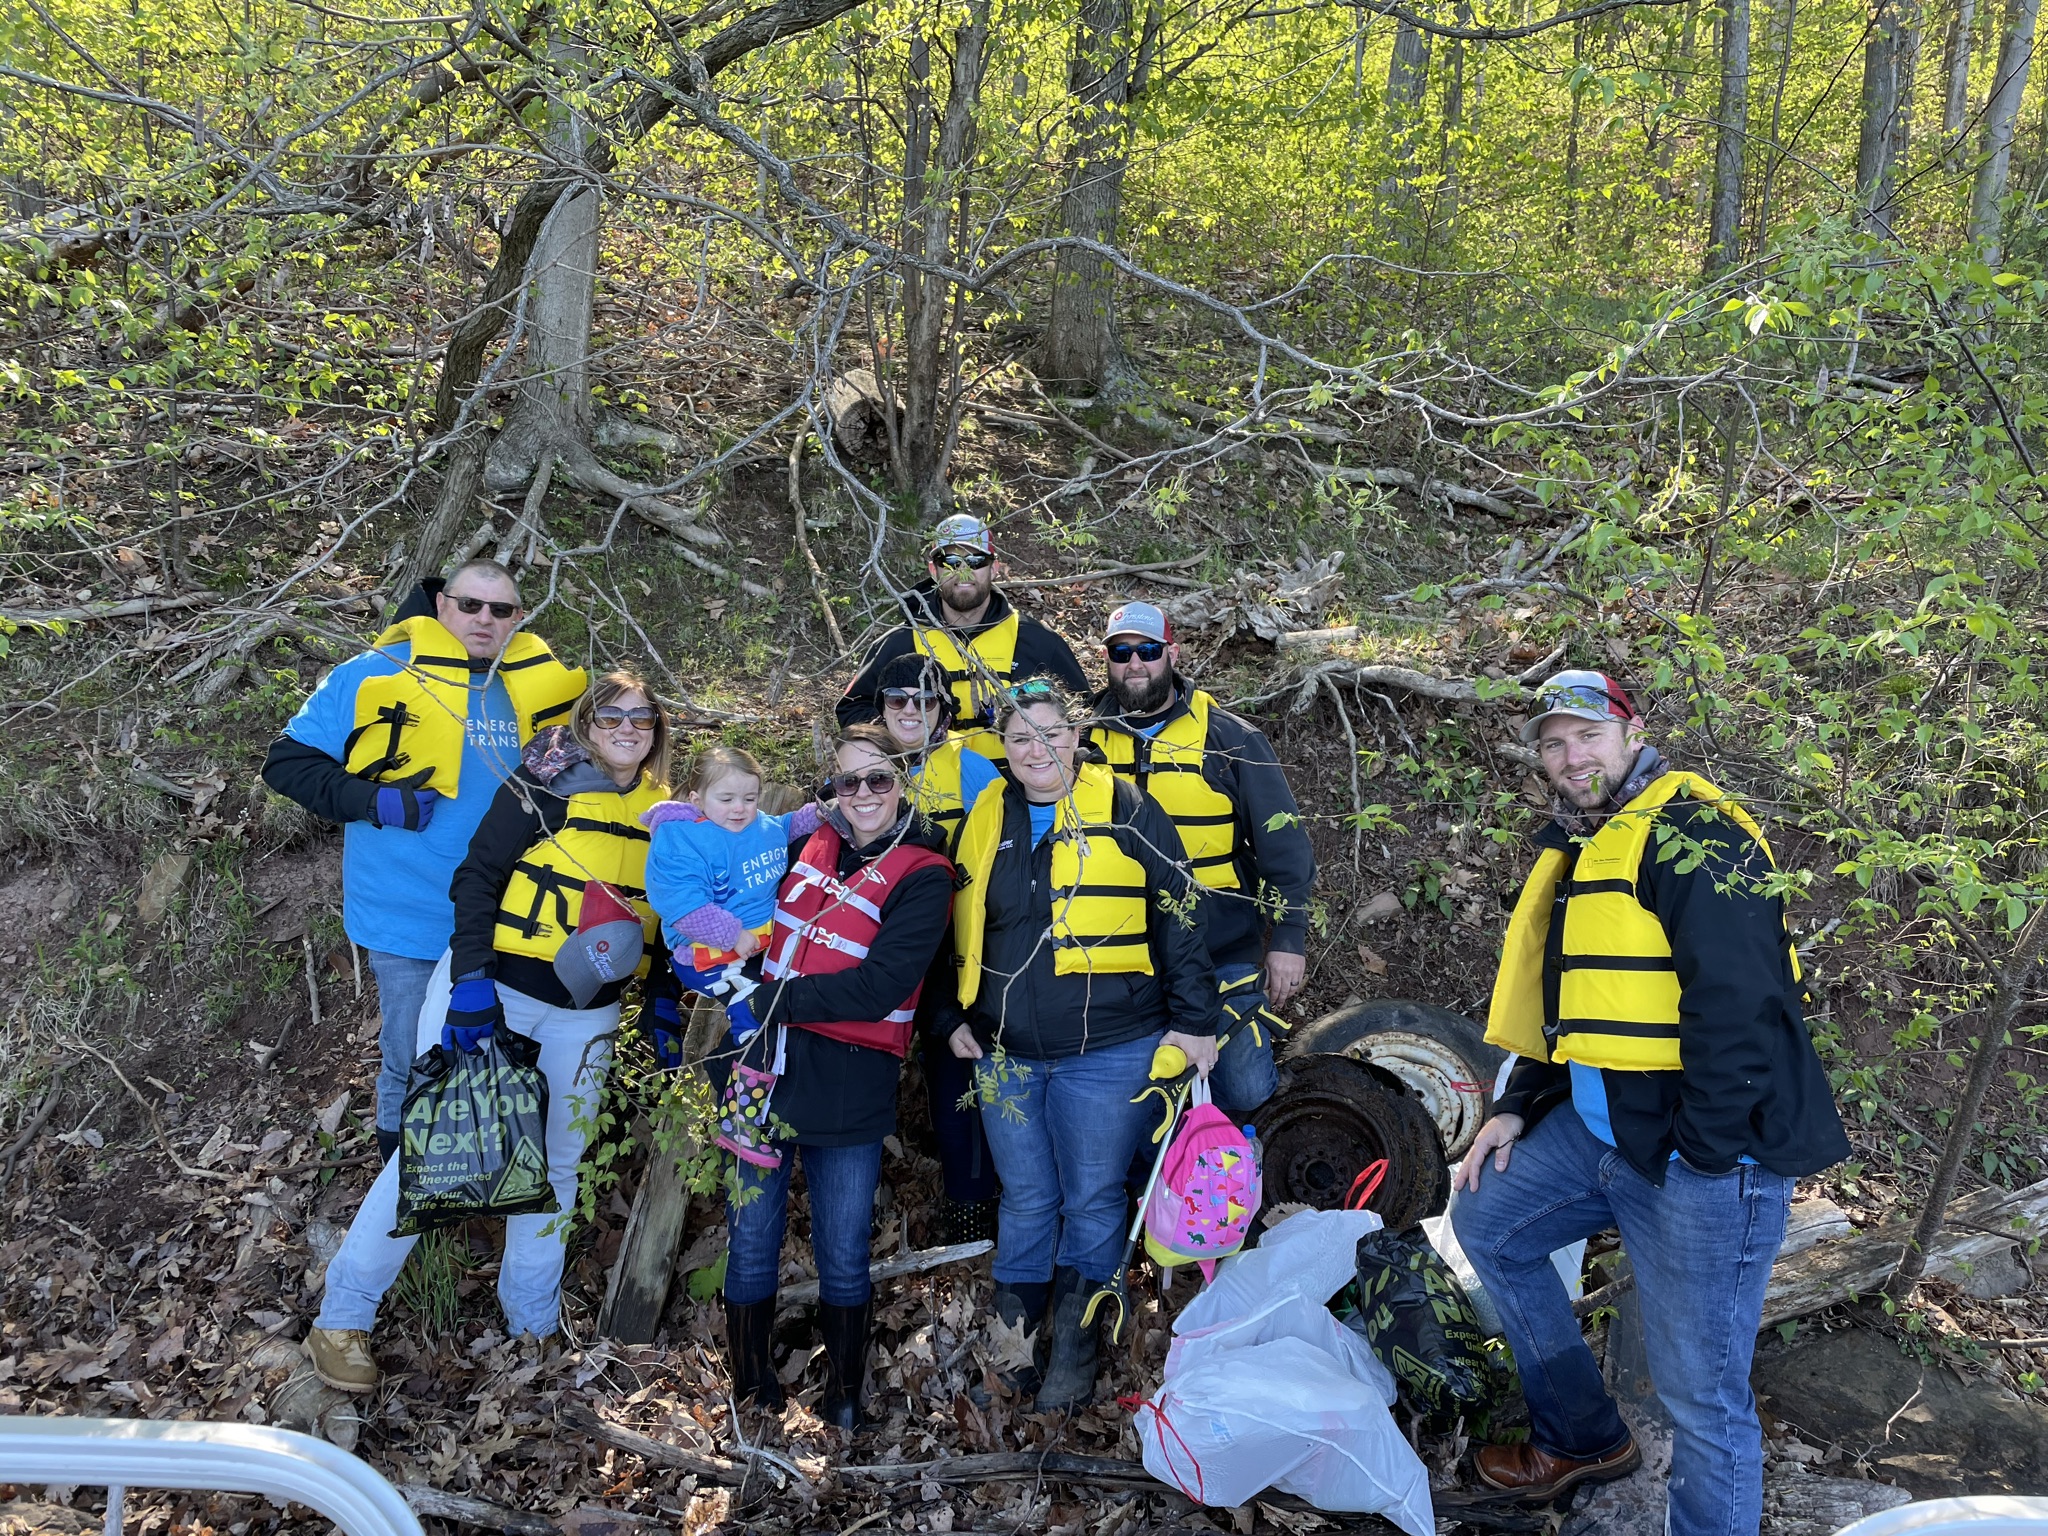 RaystownCleanup 6210 - Celebrating Earth Day in Pennsylvania